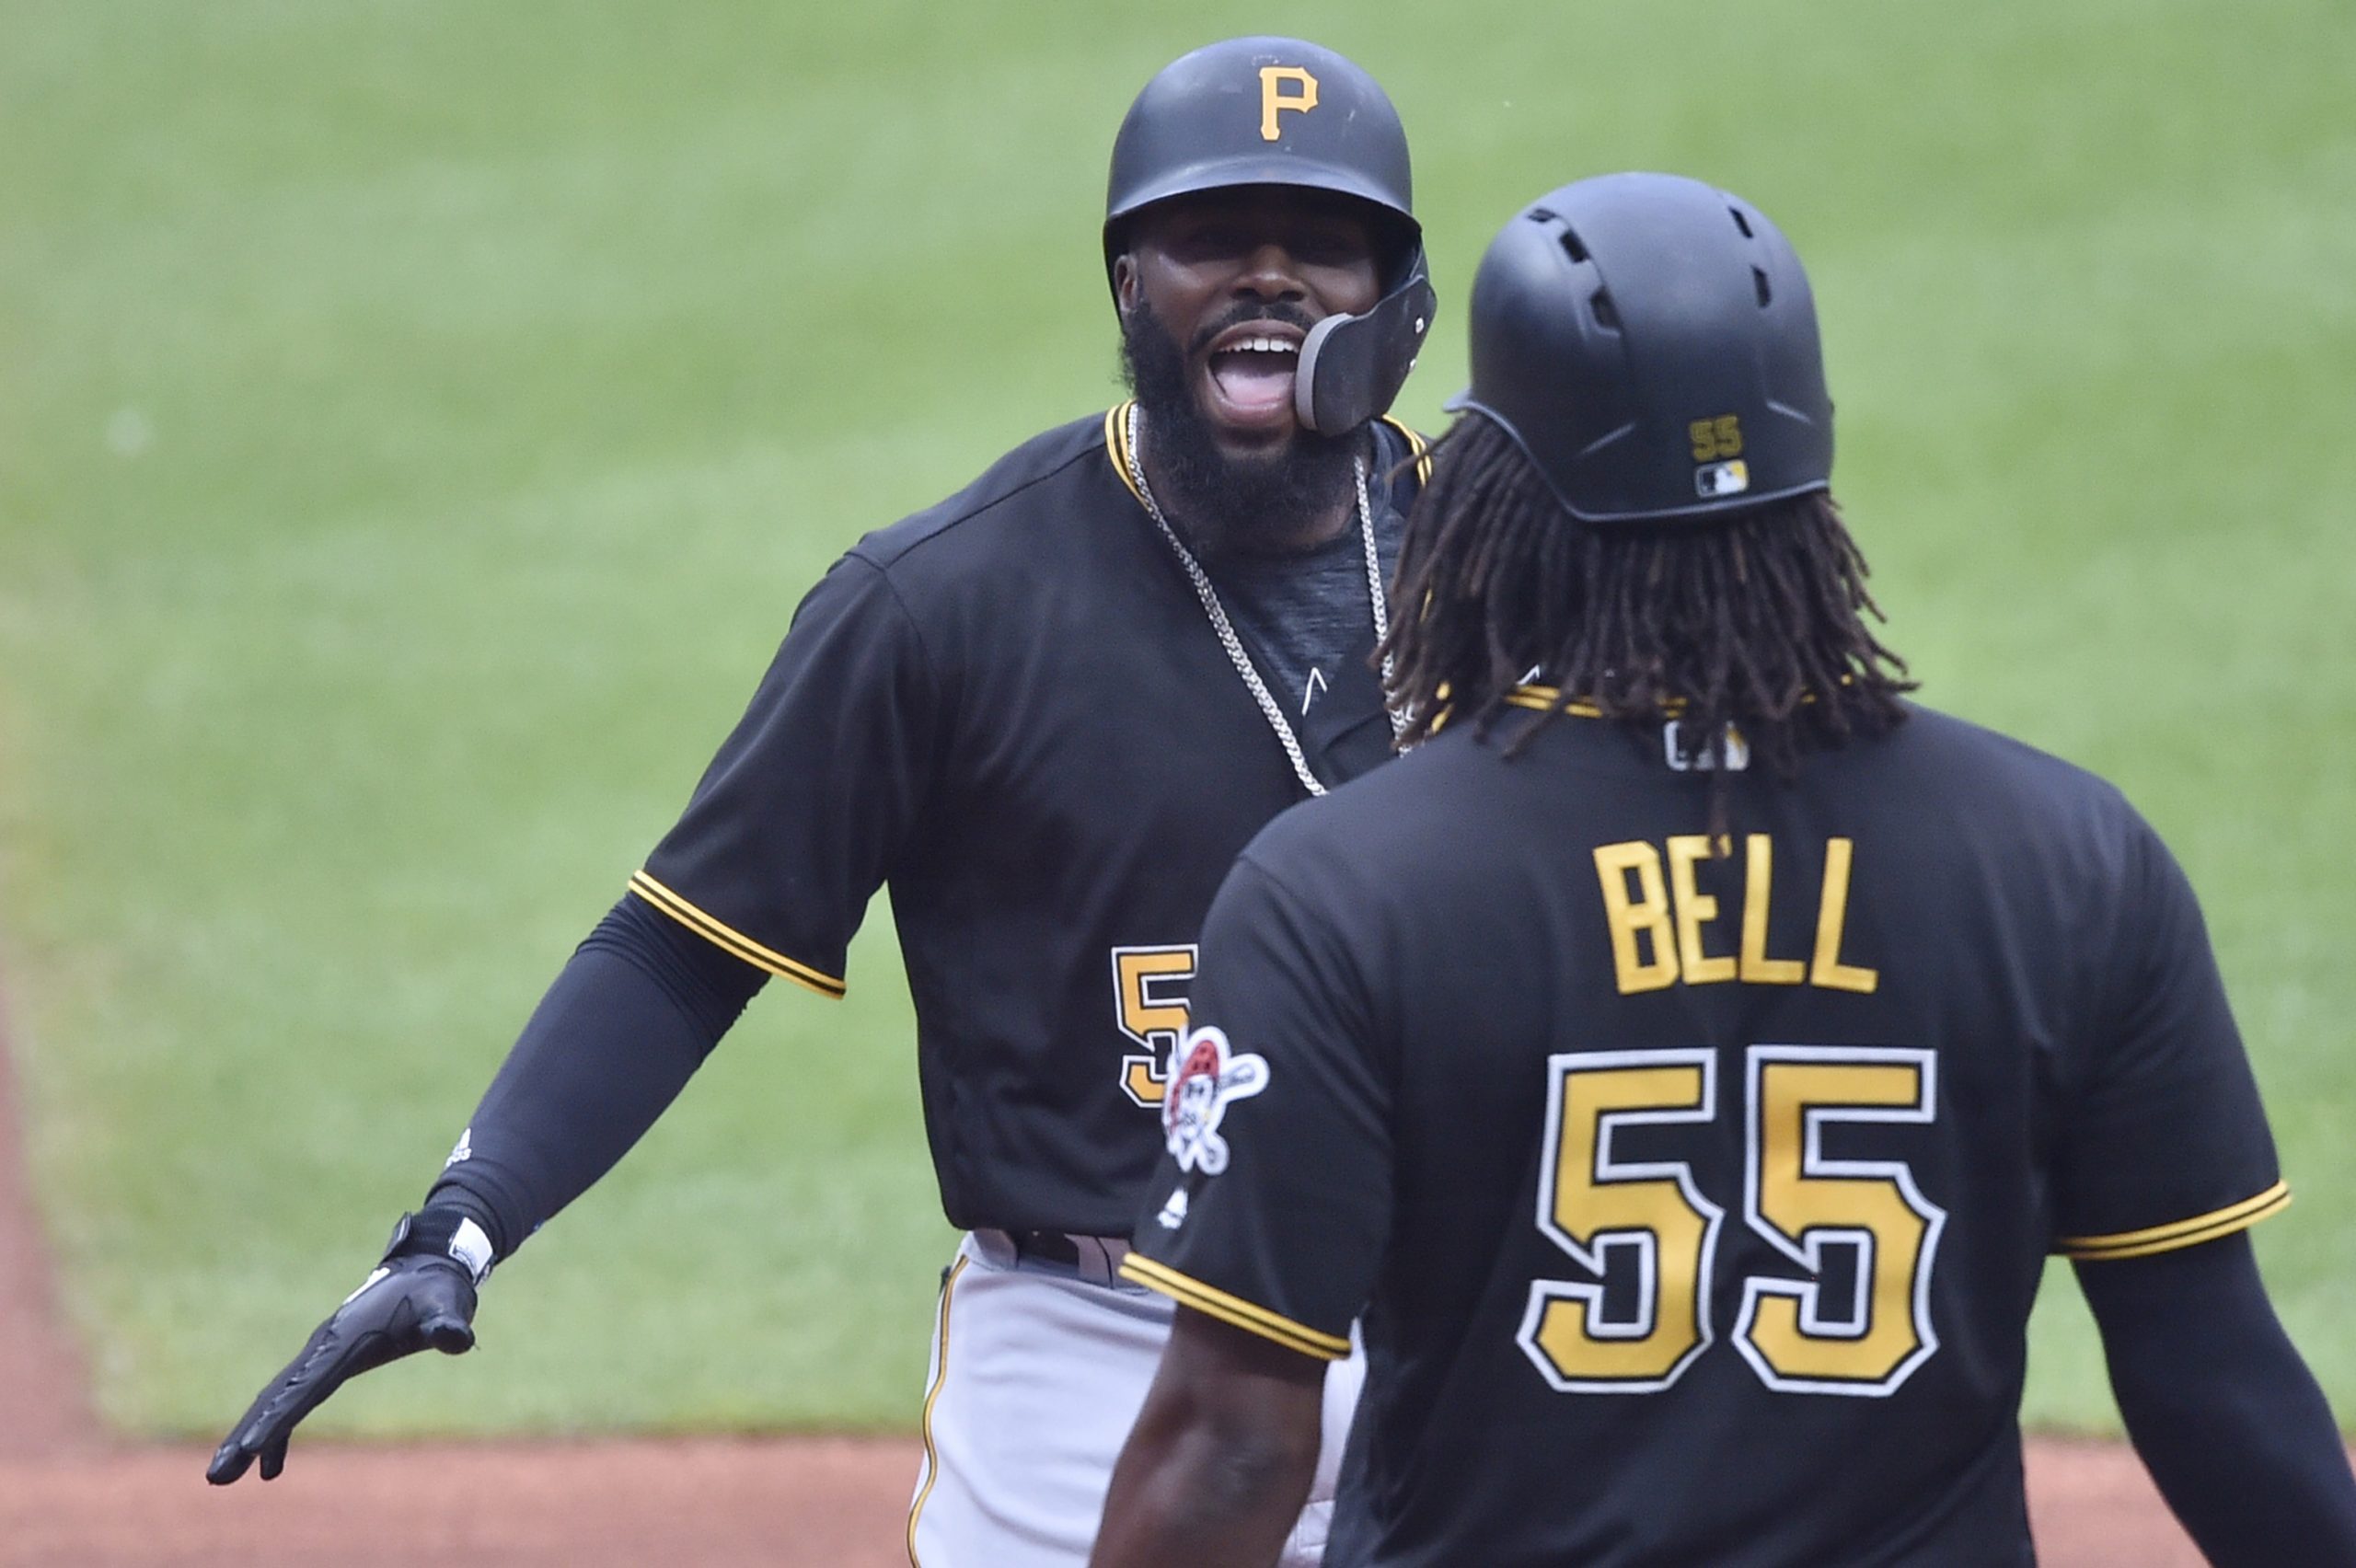 MLB: Pittsburgh Pirates at Cleveland Indians